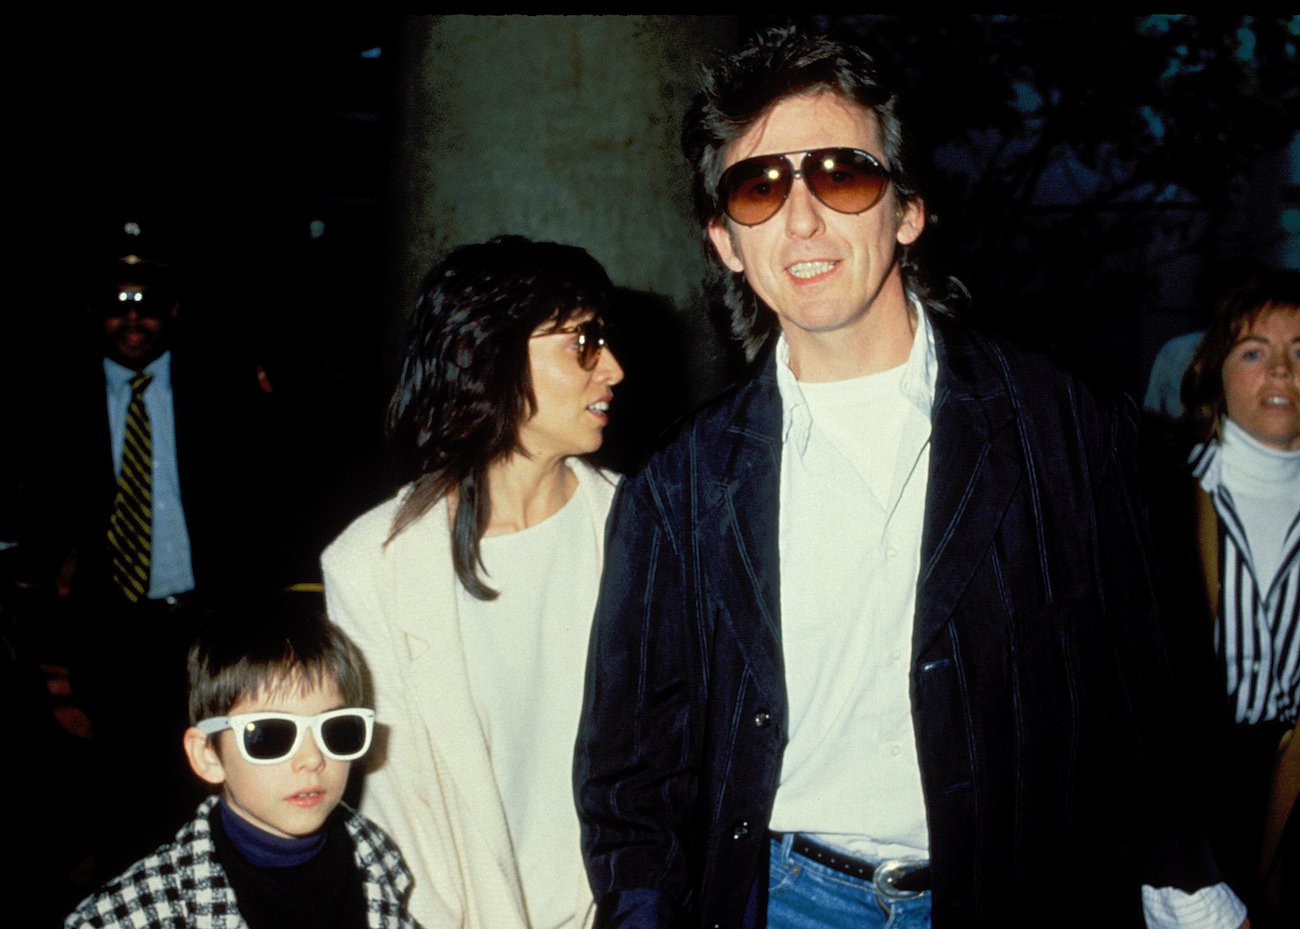 Dhani, Olivia, and George Harrison out on a night out in 1998.